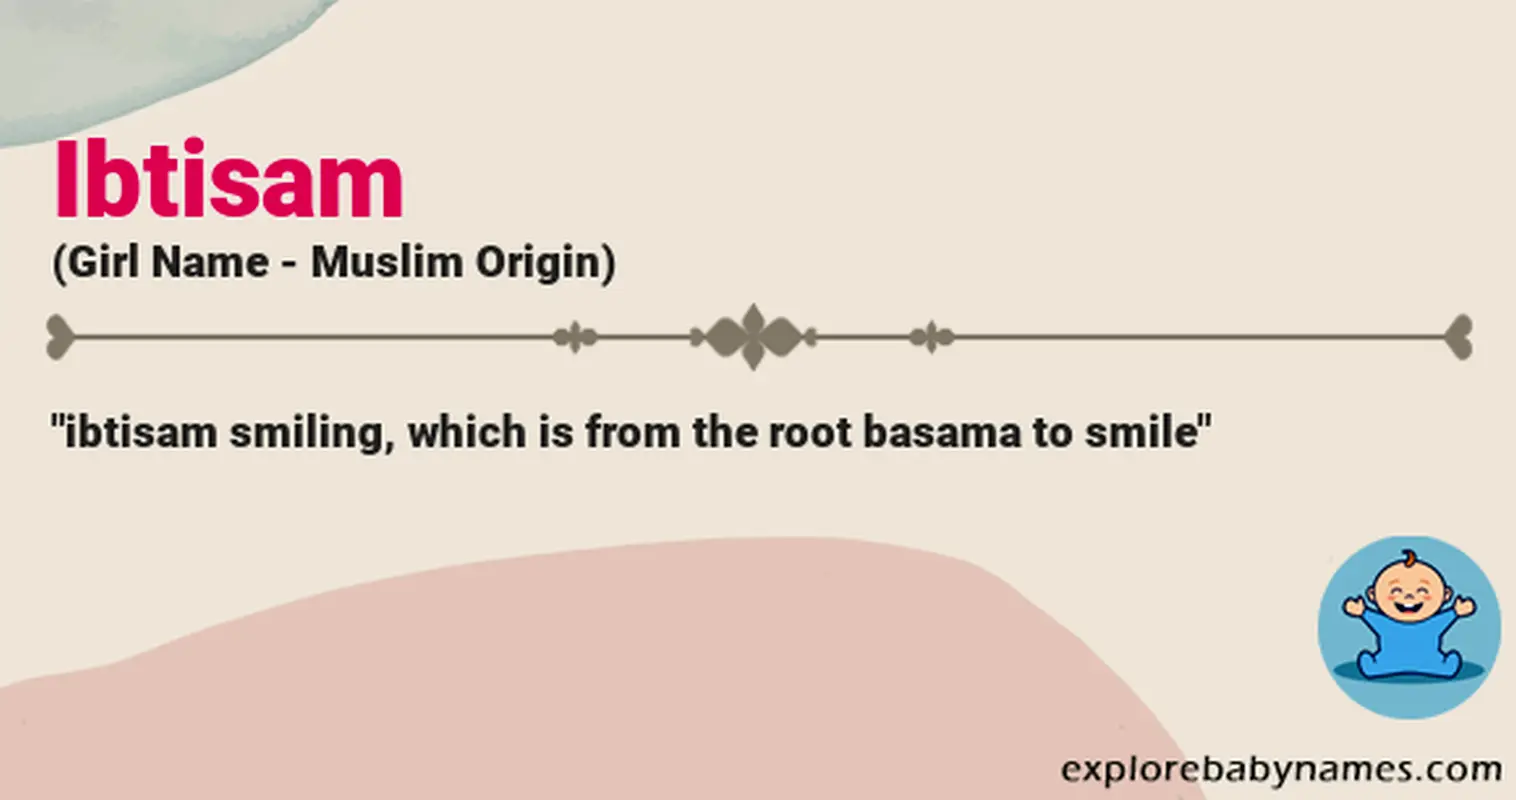 Meaning of Ibtisam